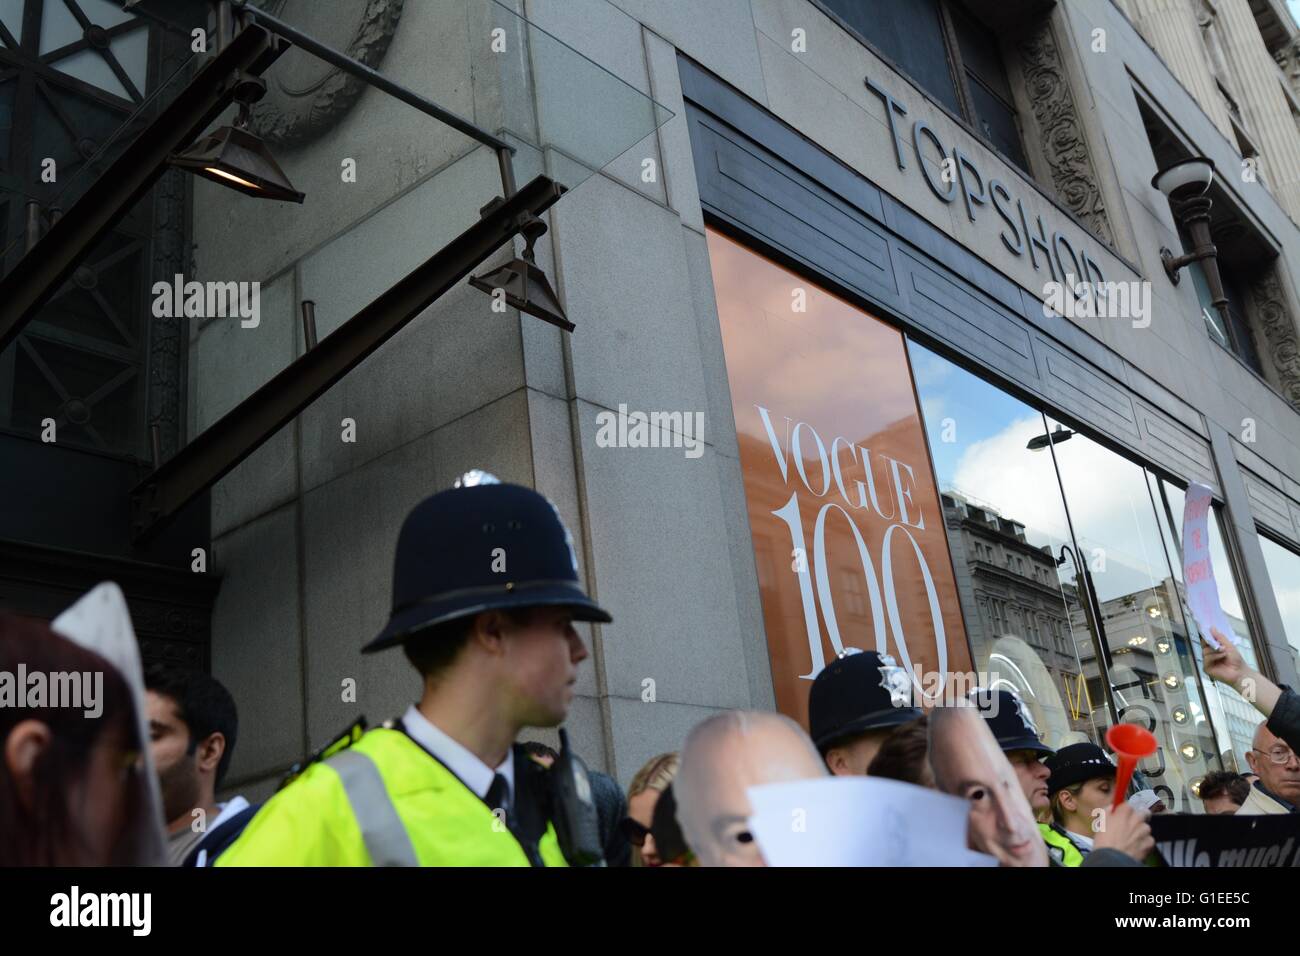 London, UK. 14th May 2016. Police arrived in numbers to police the event following previous disorder. Credit: Marc Ward/Alamy Live News Stock Photo